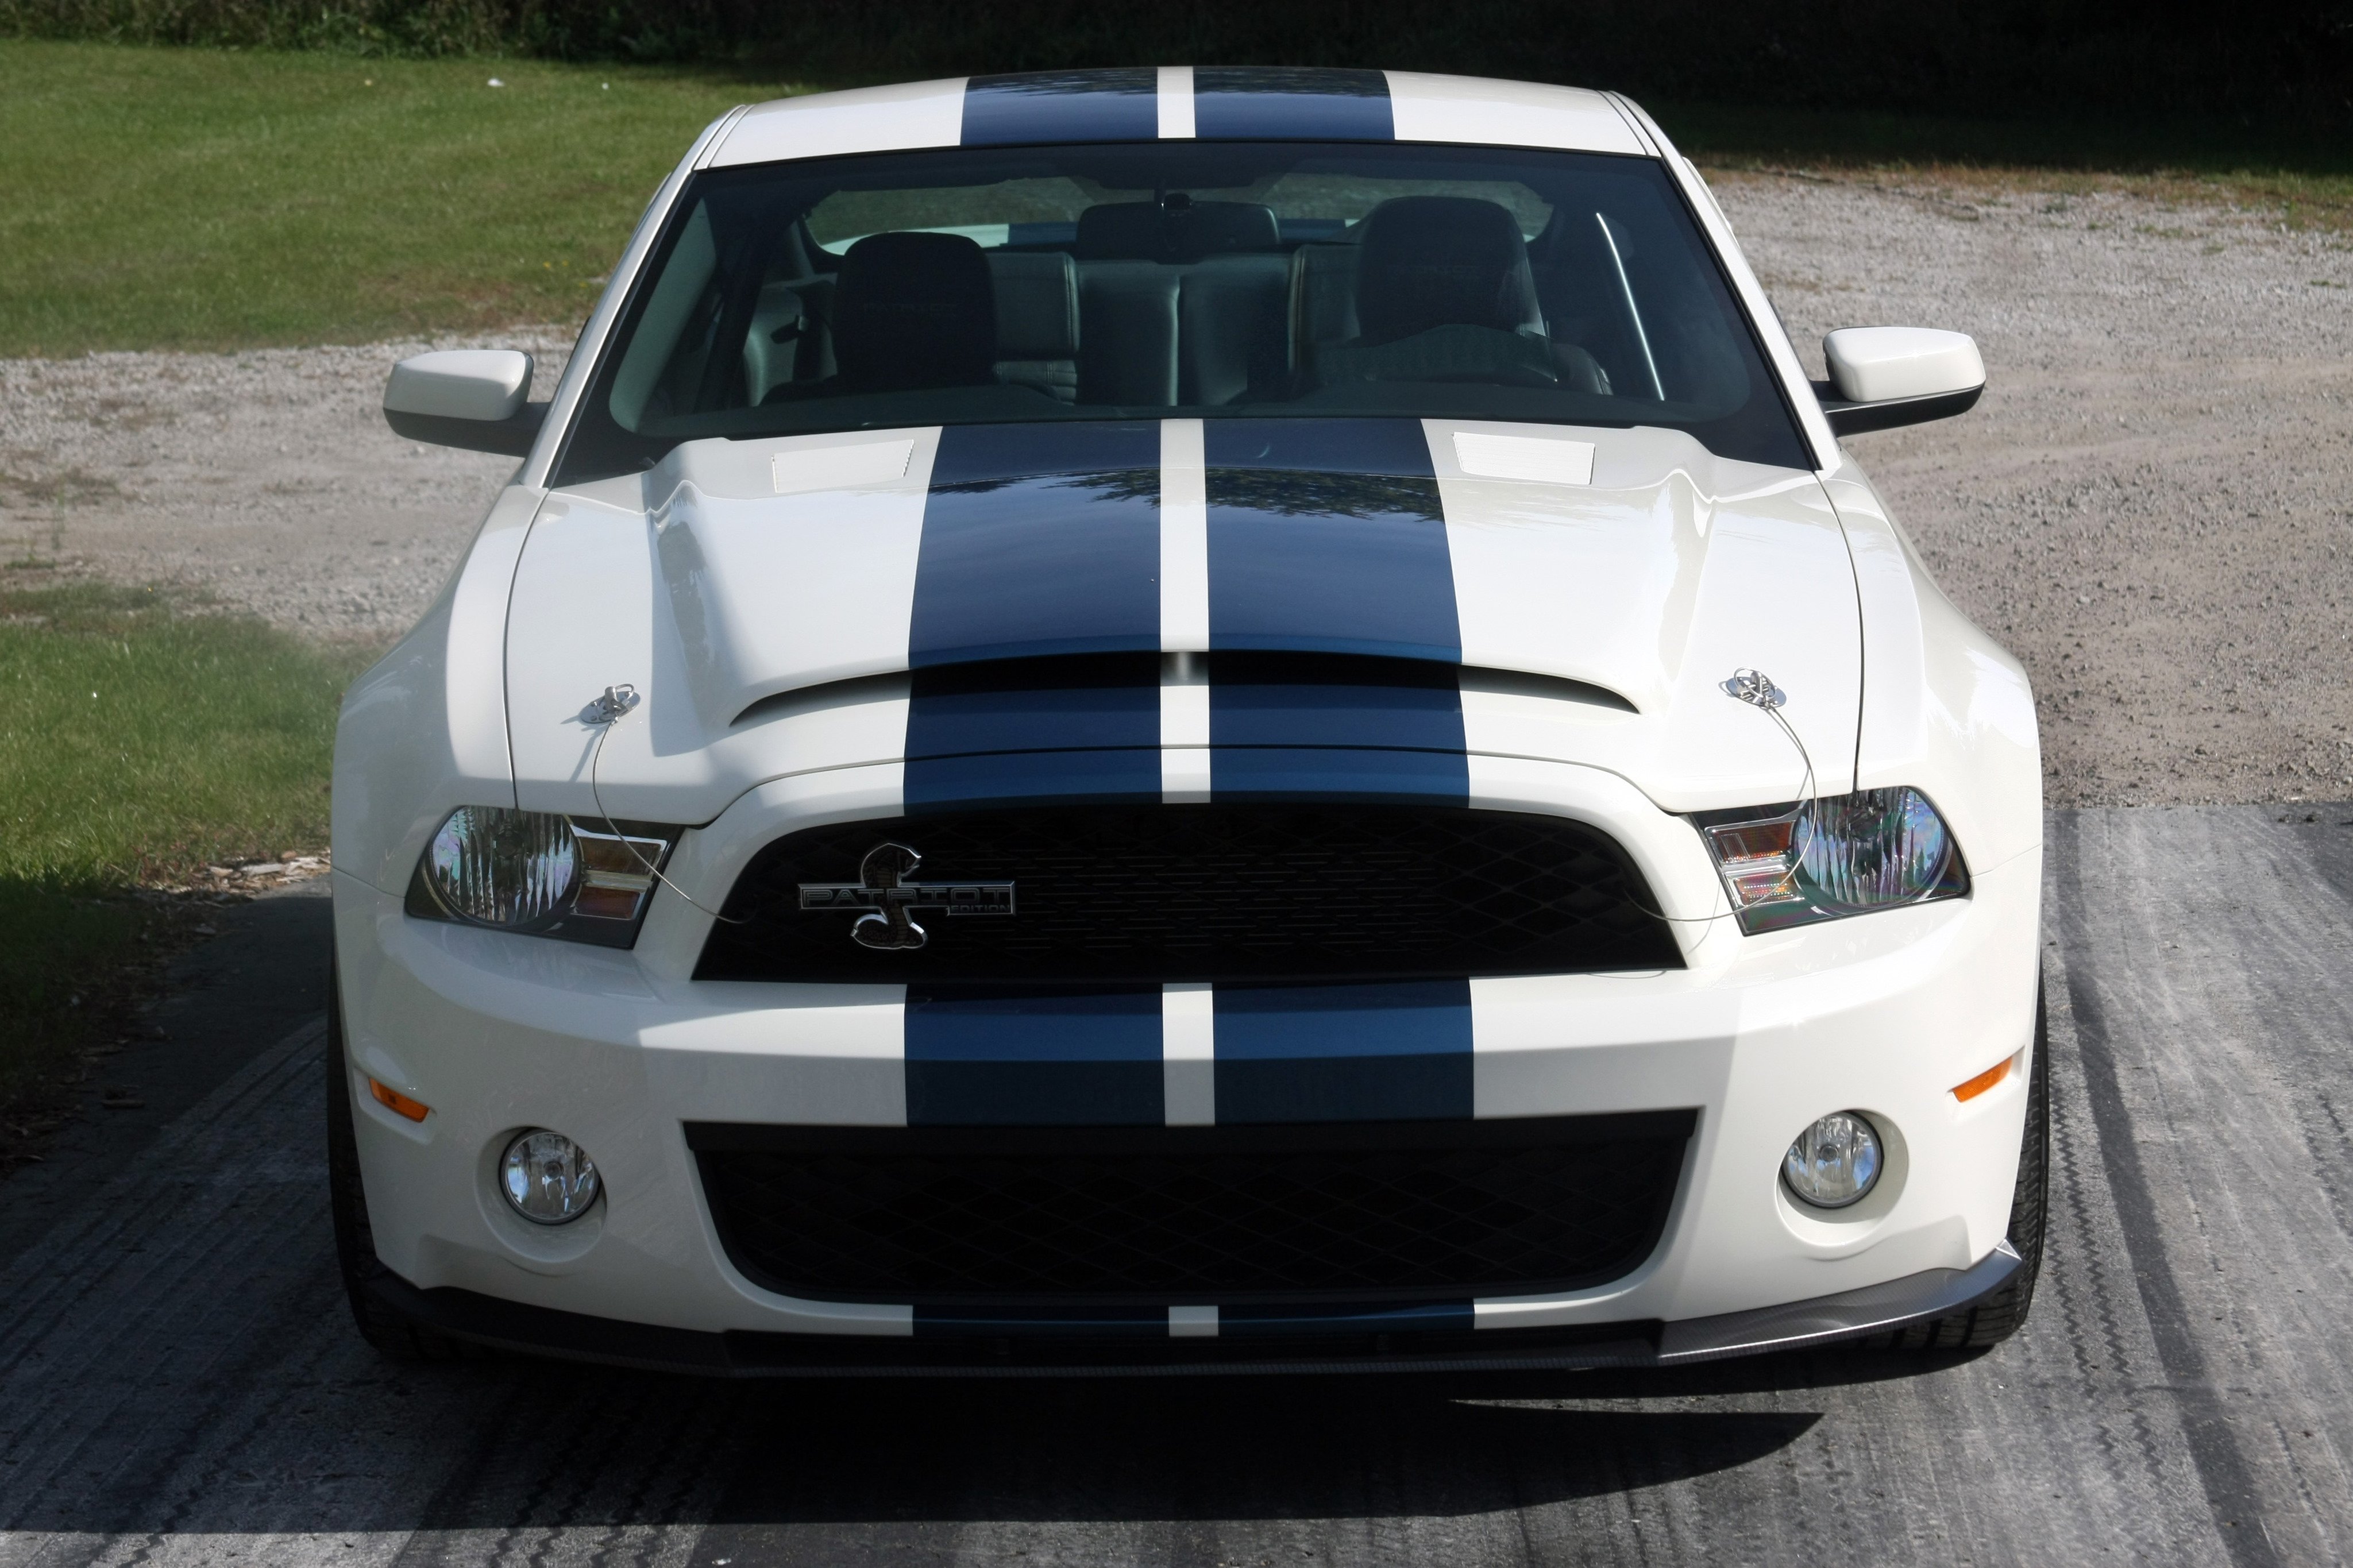 2010, Ford, Mustang, Shelby, Gt500, Patriot, Muscle, Super, Car, White, Usa, 4096x2730 01 Wallpaper